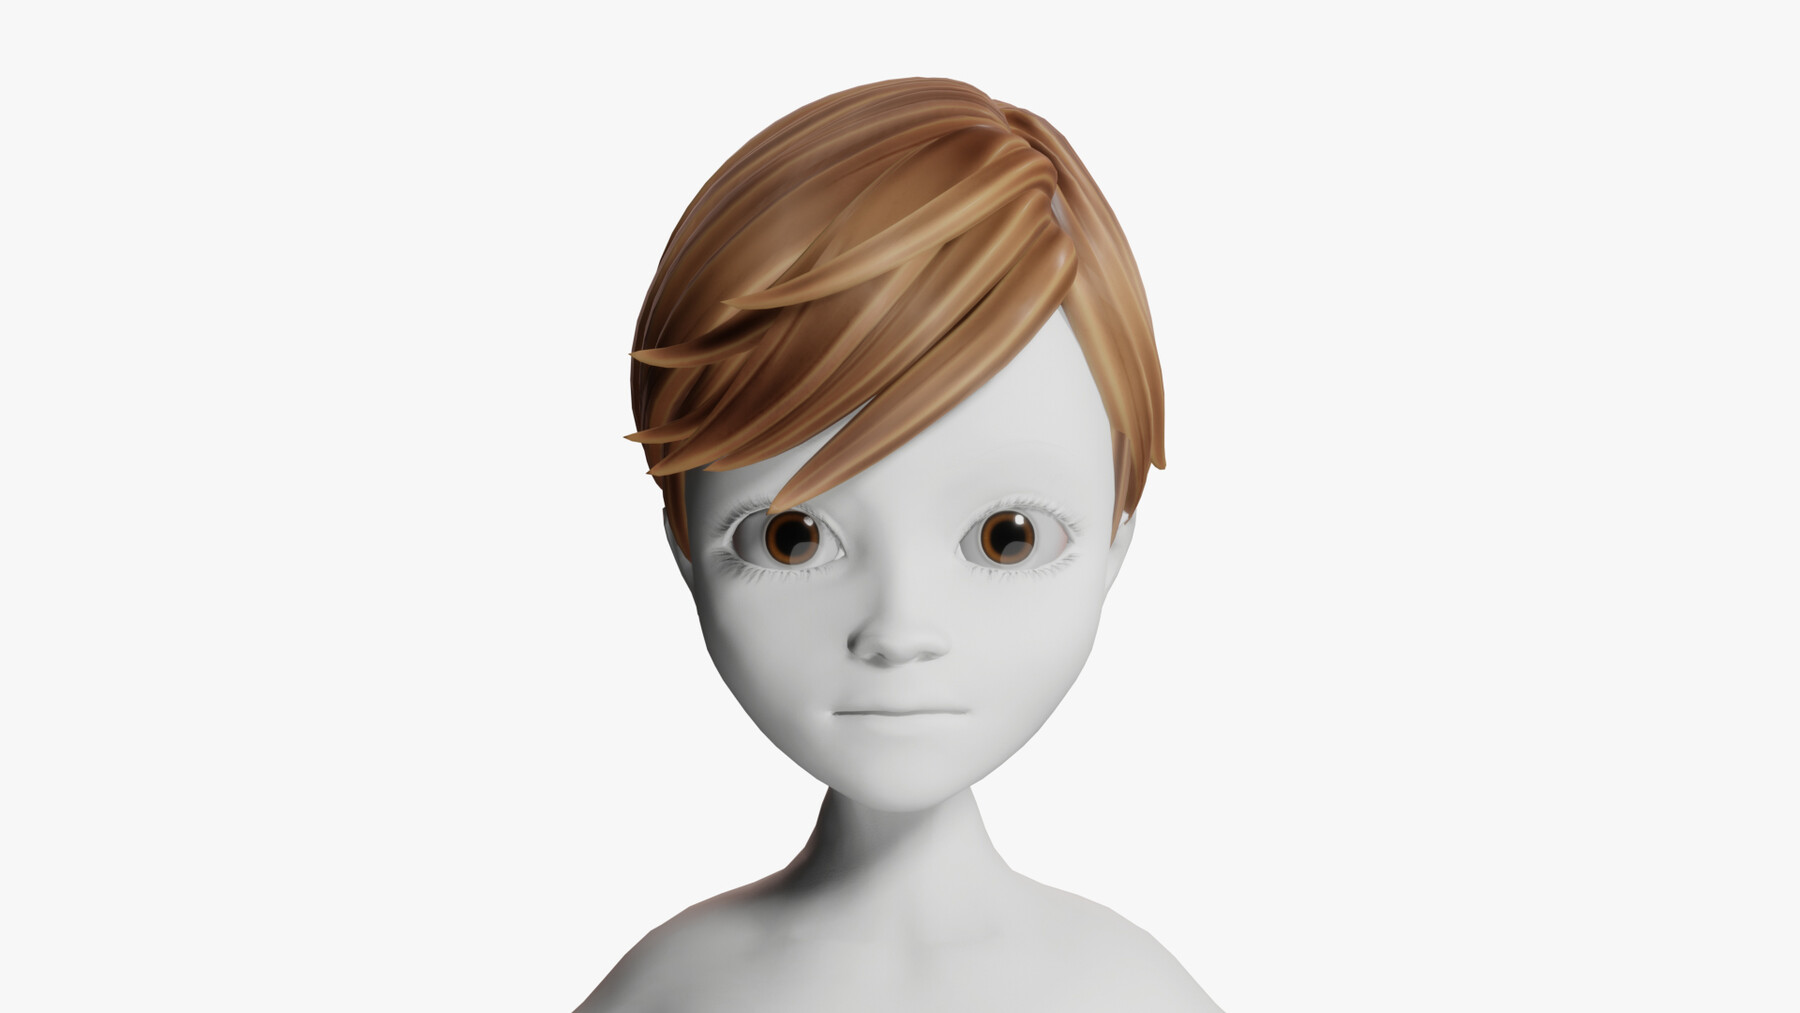 ArtStation - 3D Stylized cartoon hair 2 style for Man | Resources